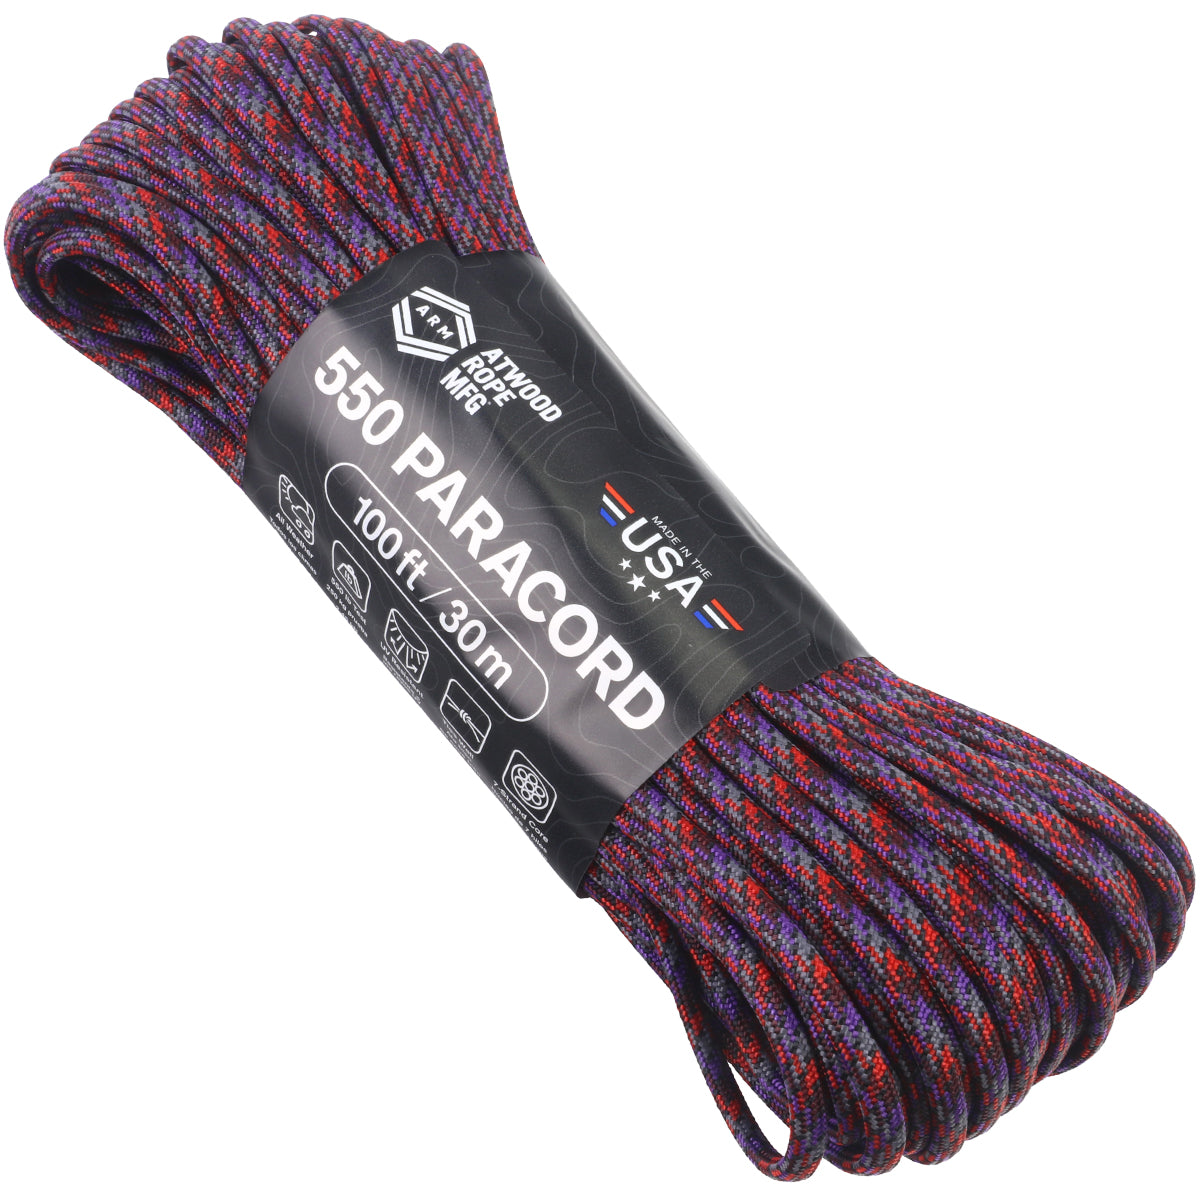 Atwood Paracord (Parachute Cord) 550 Type, 7 Strands, 100 Feet